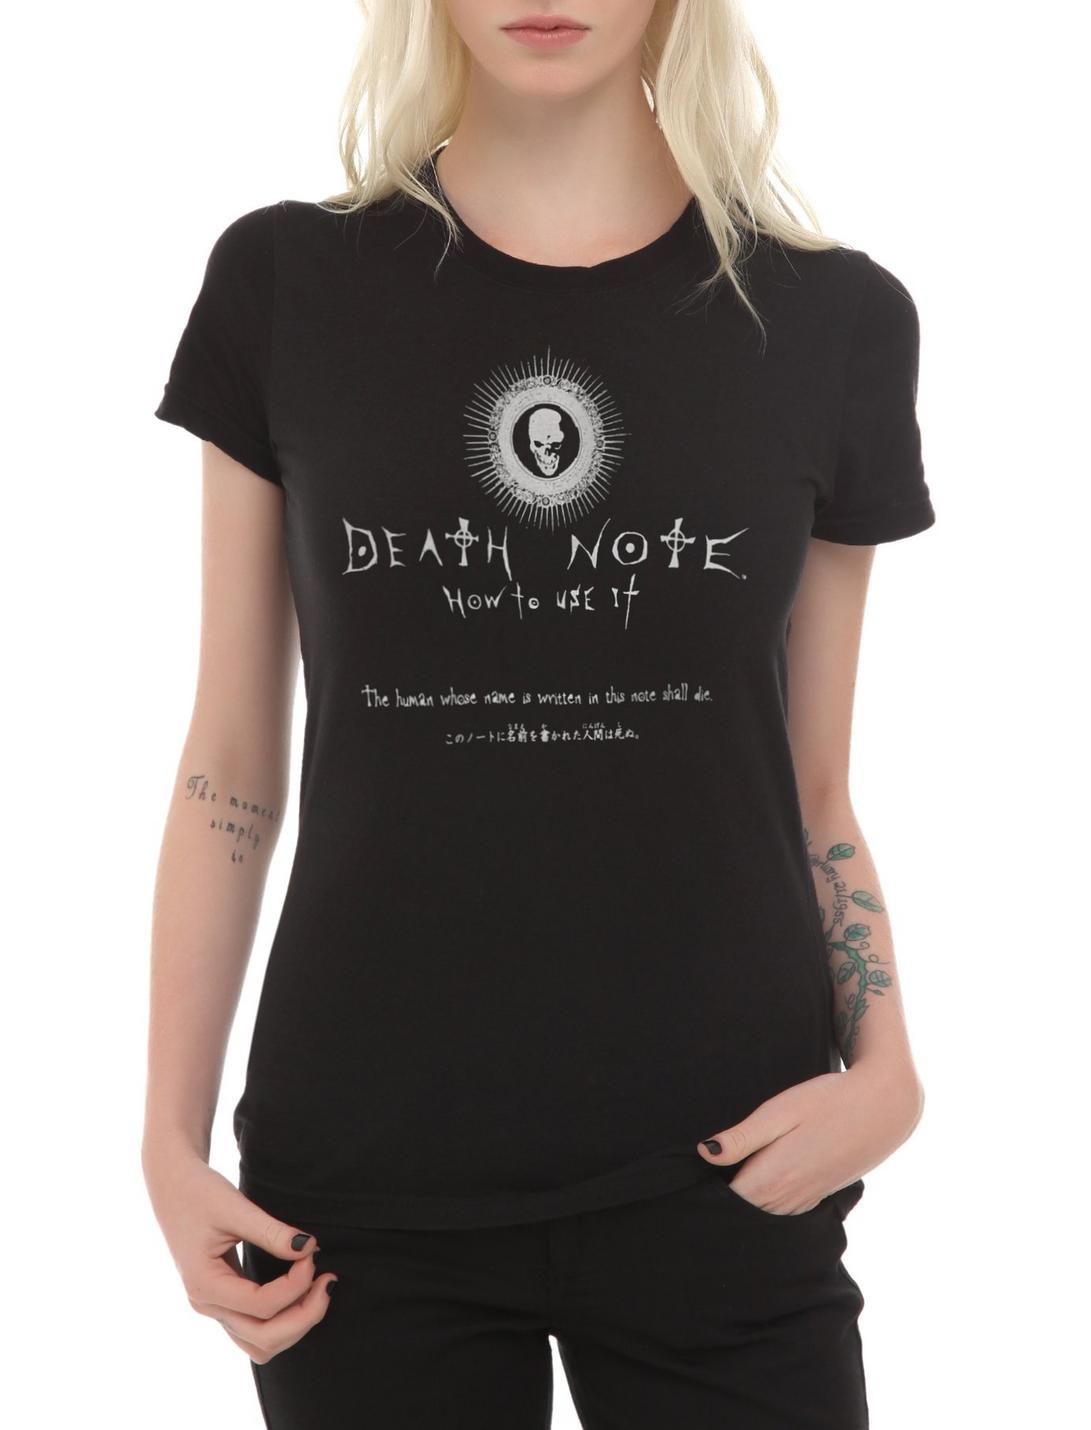 Death Note How To Use It Girls T-Shirt, BLACK, hi-res